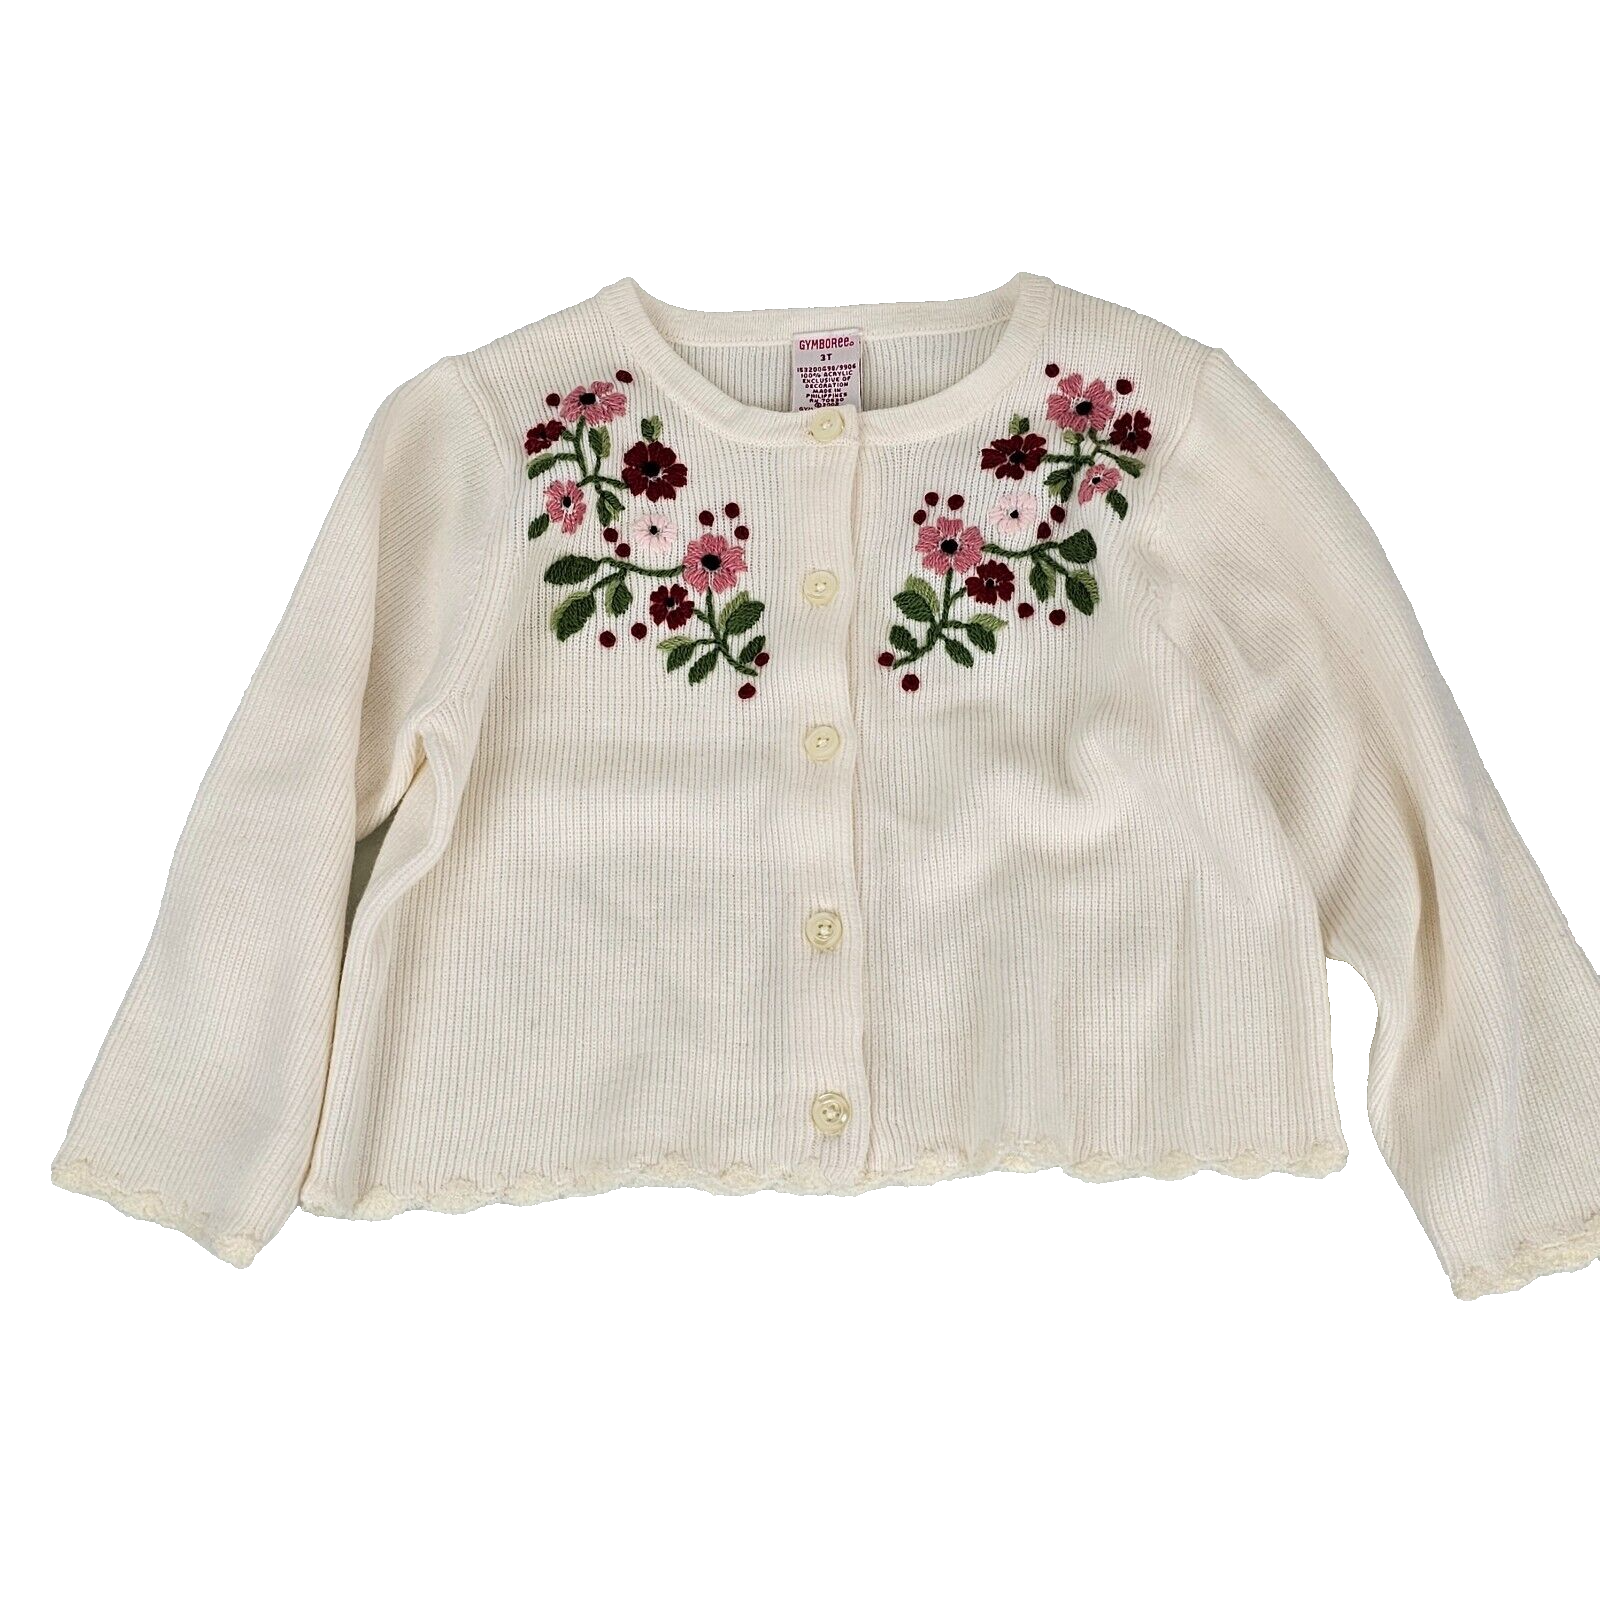 Primary image for VTG 2002 Gymboree Victorian Charm Cream Cardigan Sweater Flower Embroidery 3t